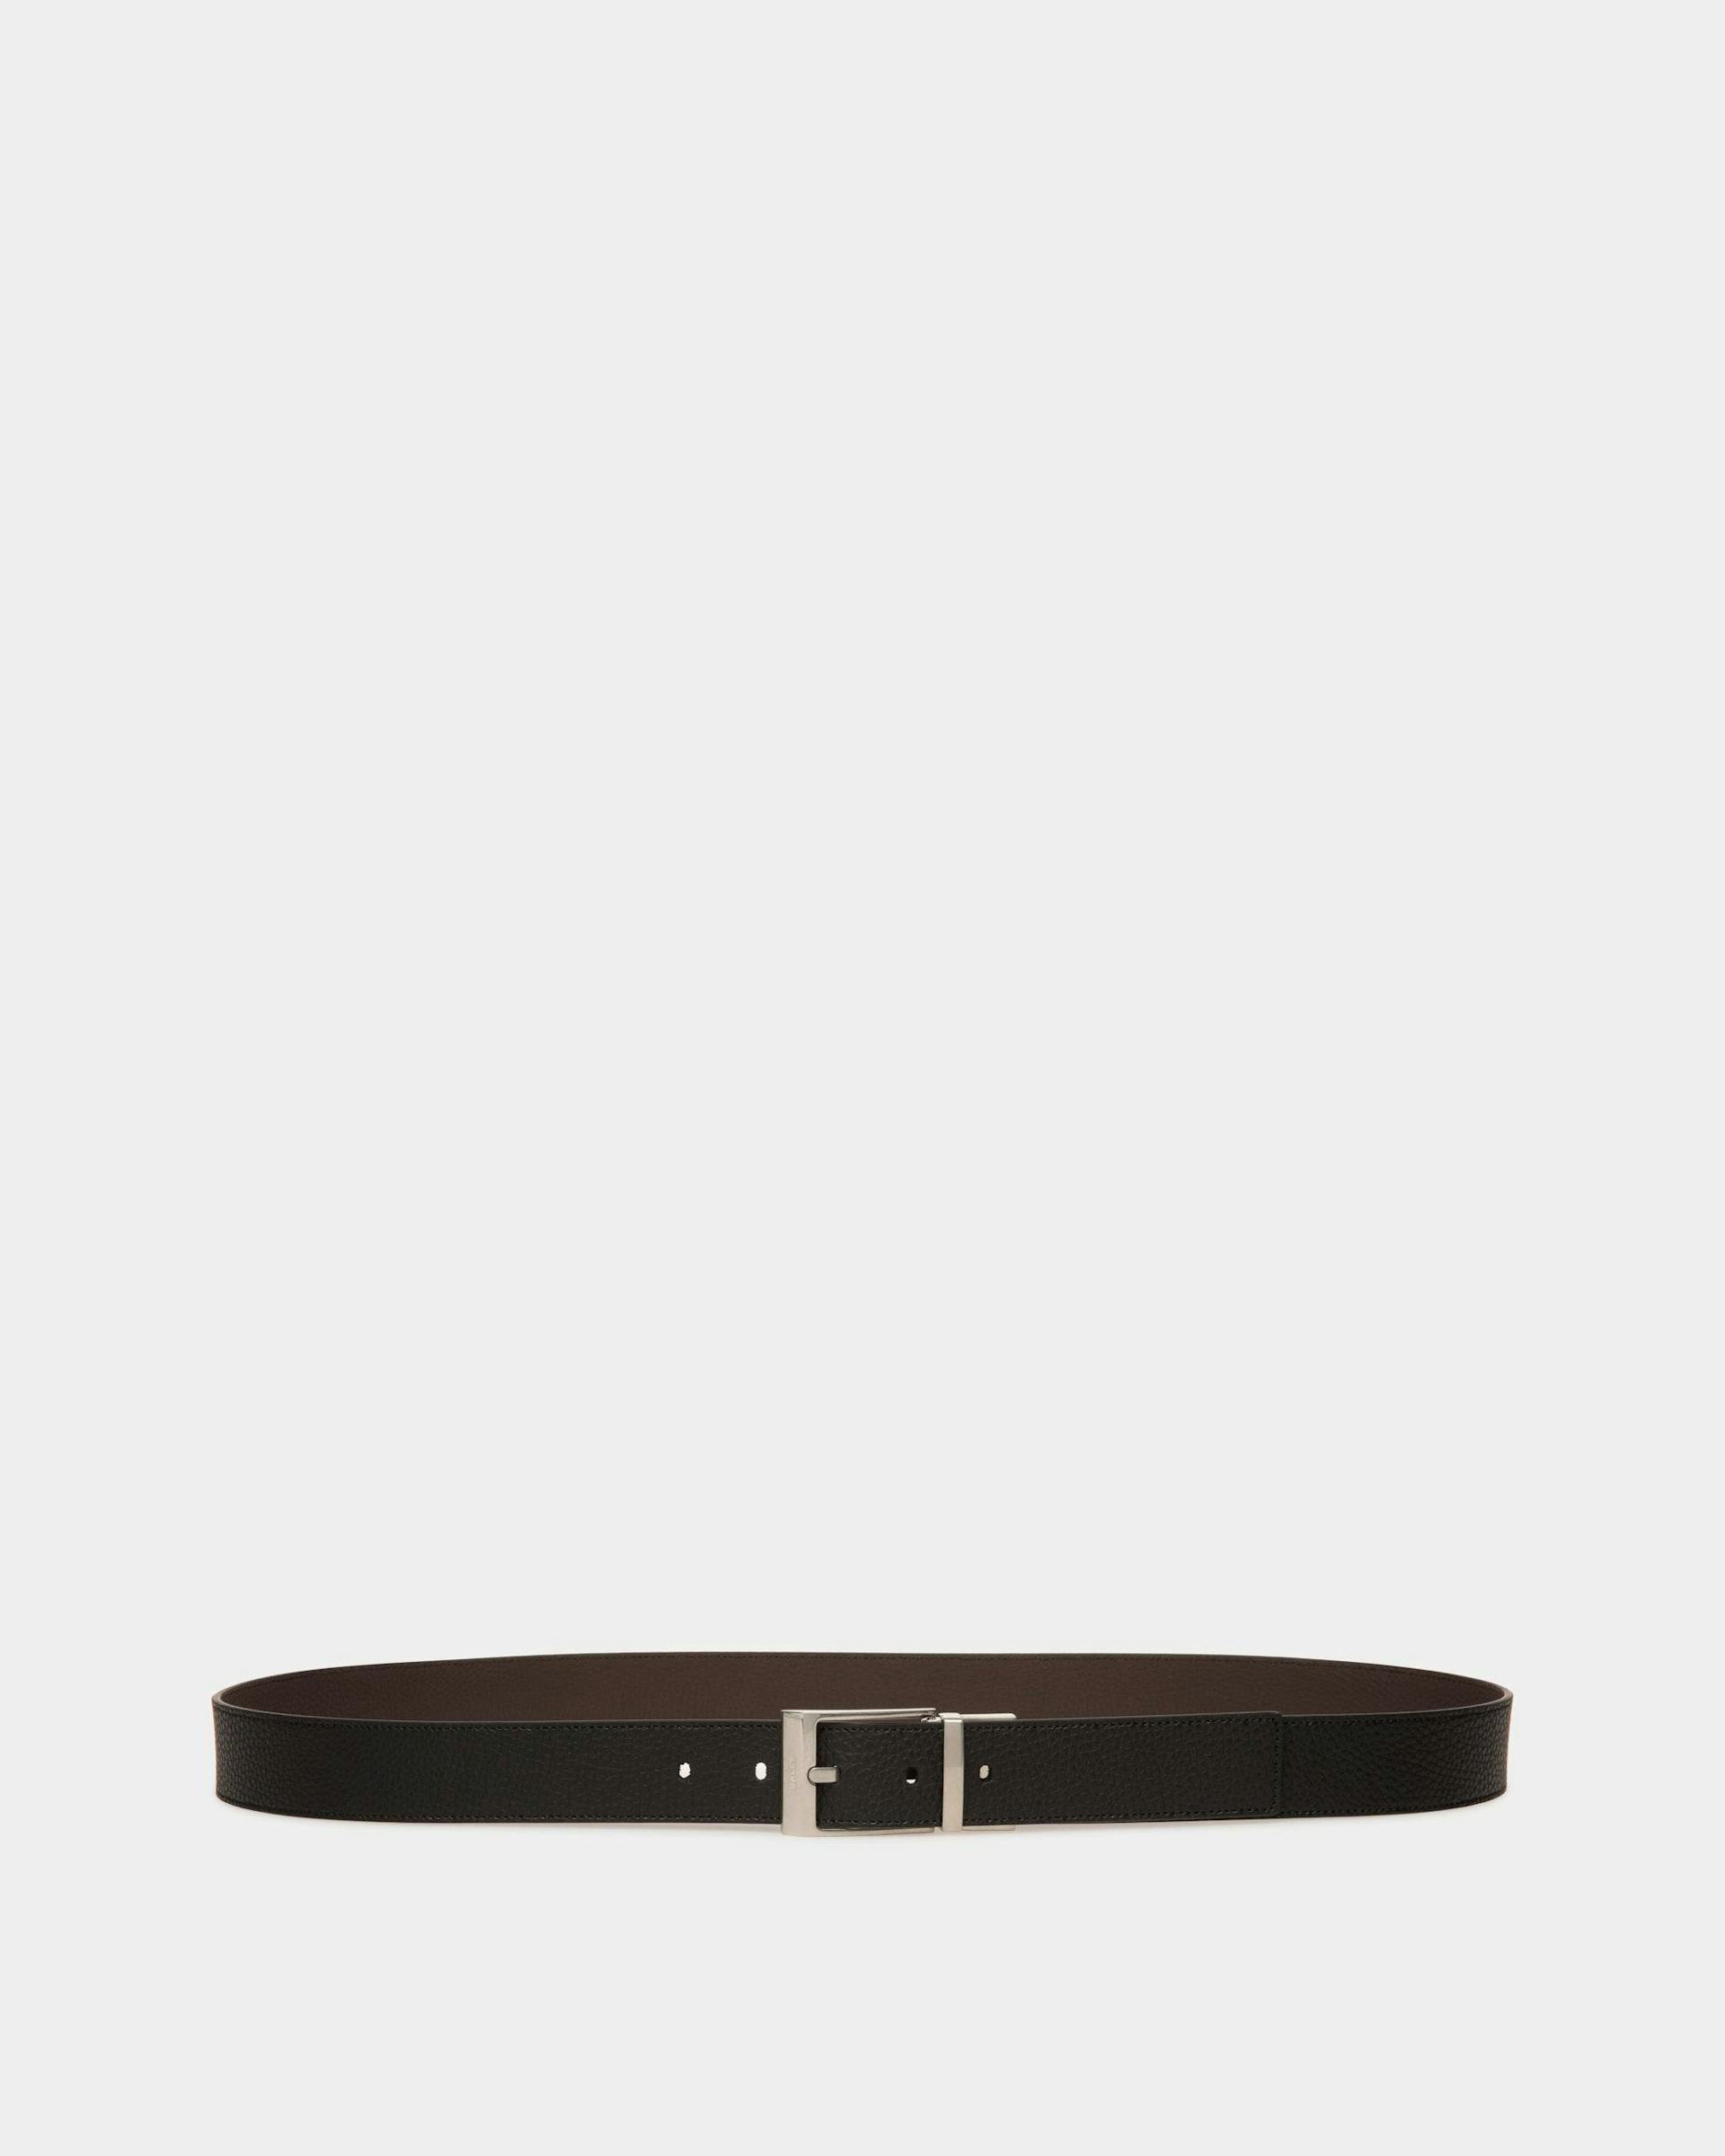 Men's Dress Belt In Brown And Black Leather | Bally | Still Life Front